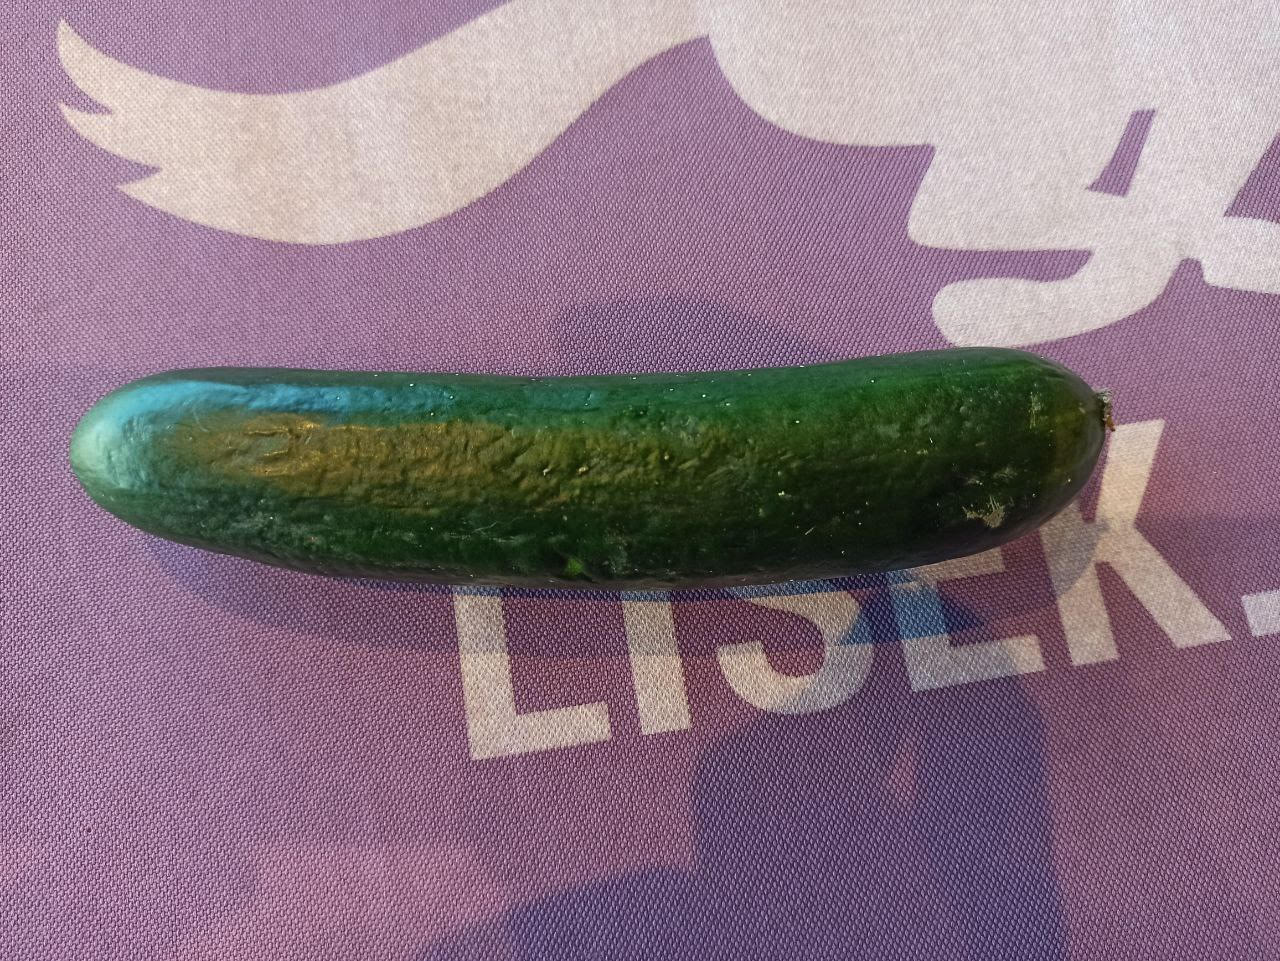 A green cucumber on a purple surface

Description automatically generated